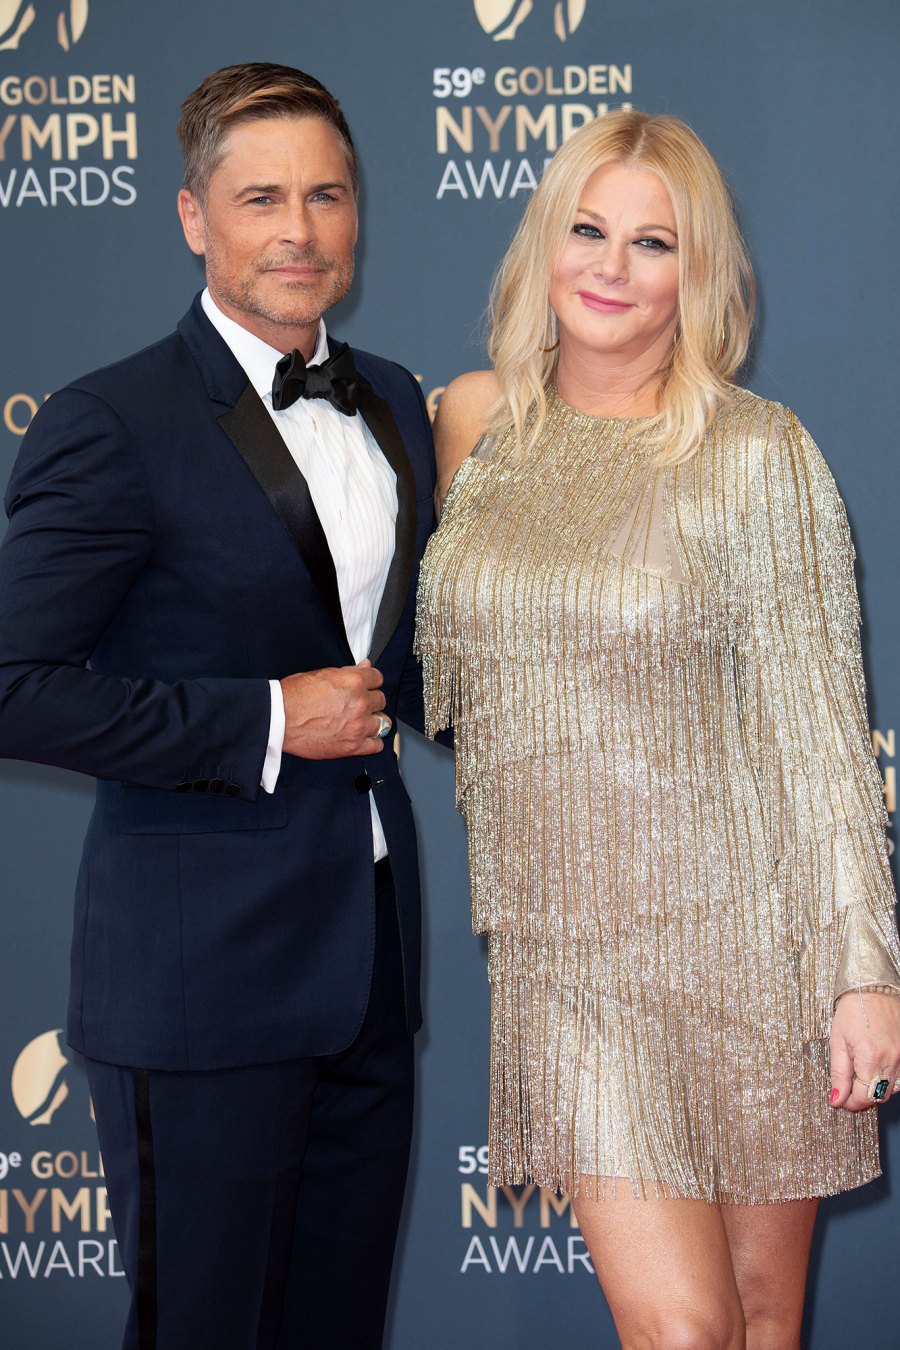 Rob Lowe's Family Guide: Wife Sheryl Berkoff, 2 Sons and More